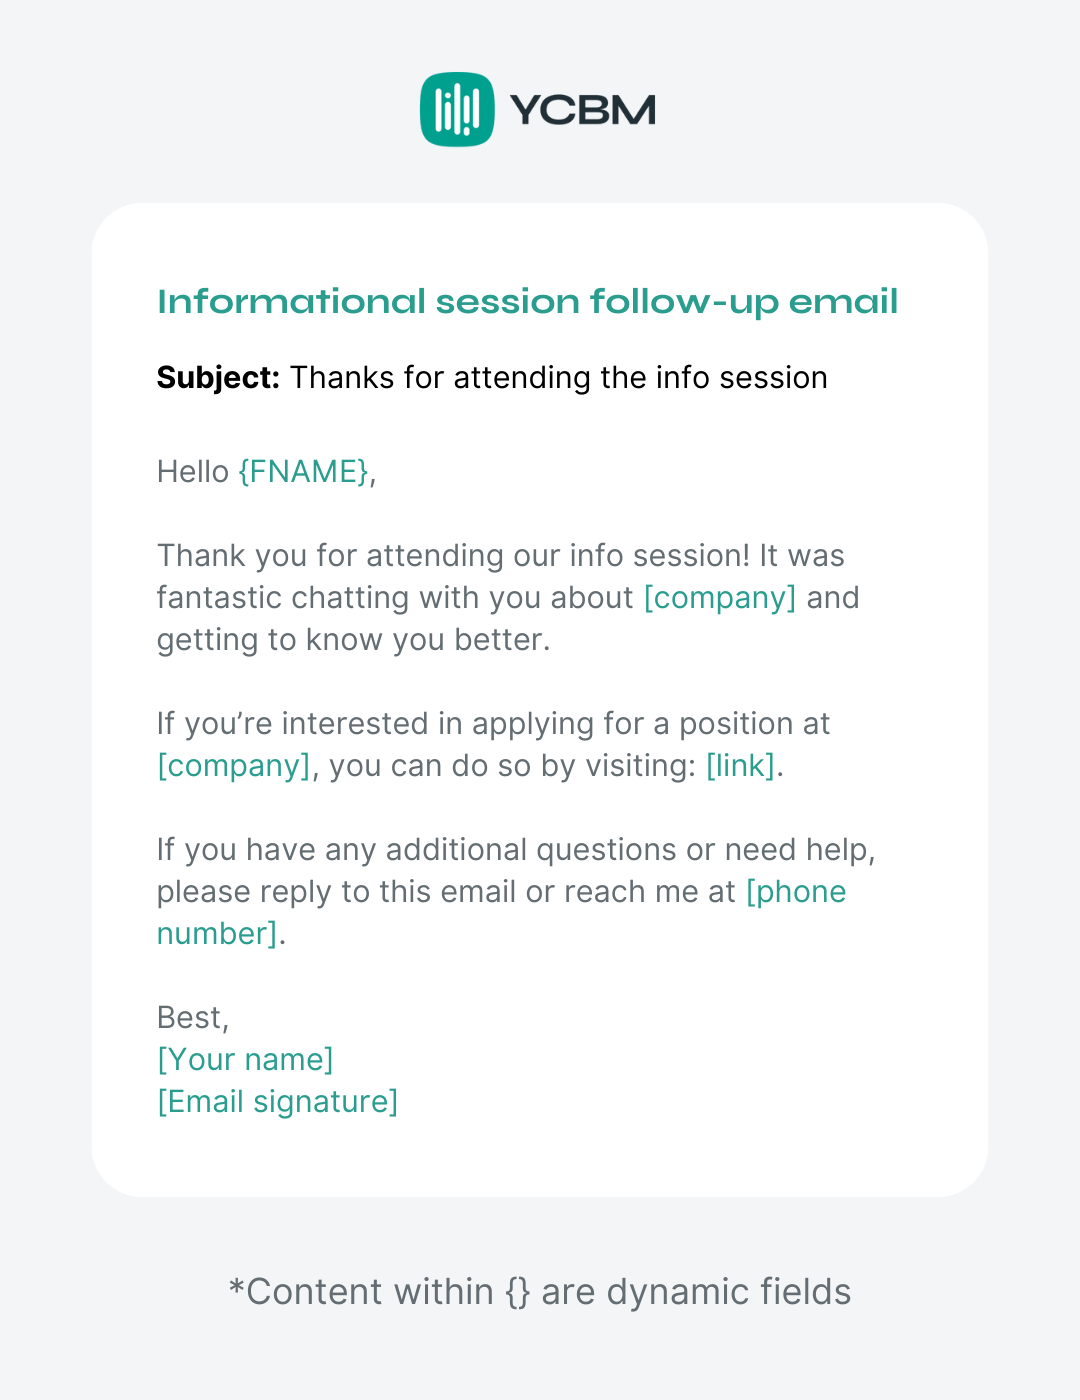 informational session follow-up email